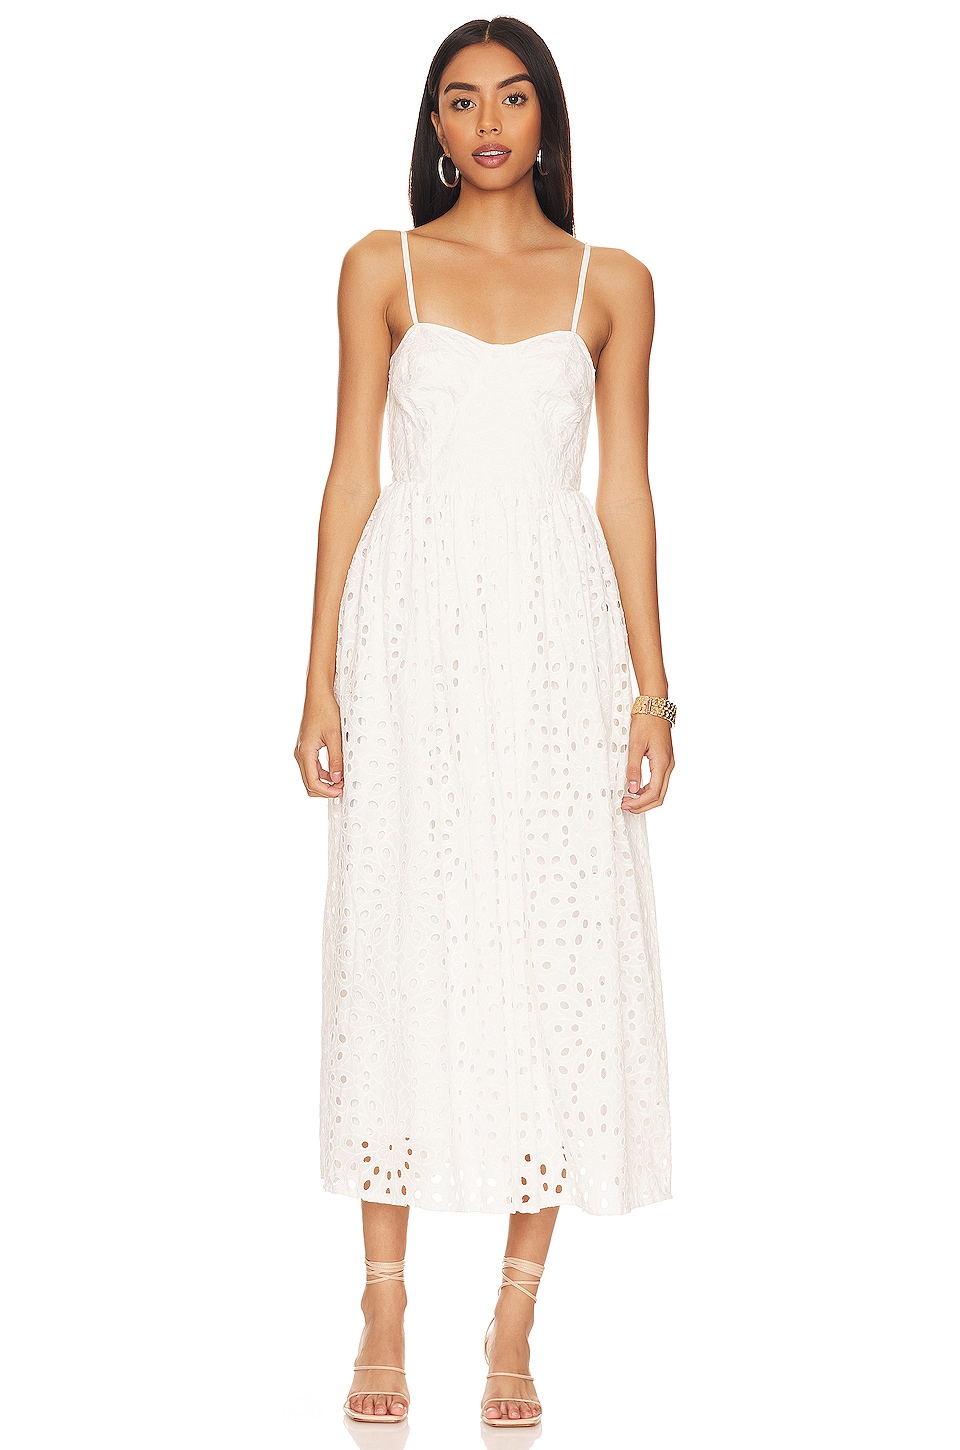 Discover your favorite stunning white maxi dress for summer vacation to make you feel like a Greek Goddess. Plus flat sandals & accessories.